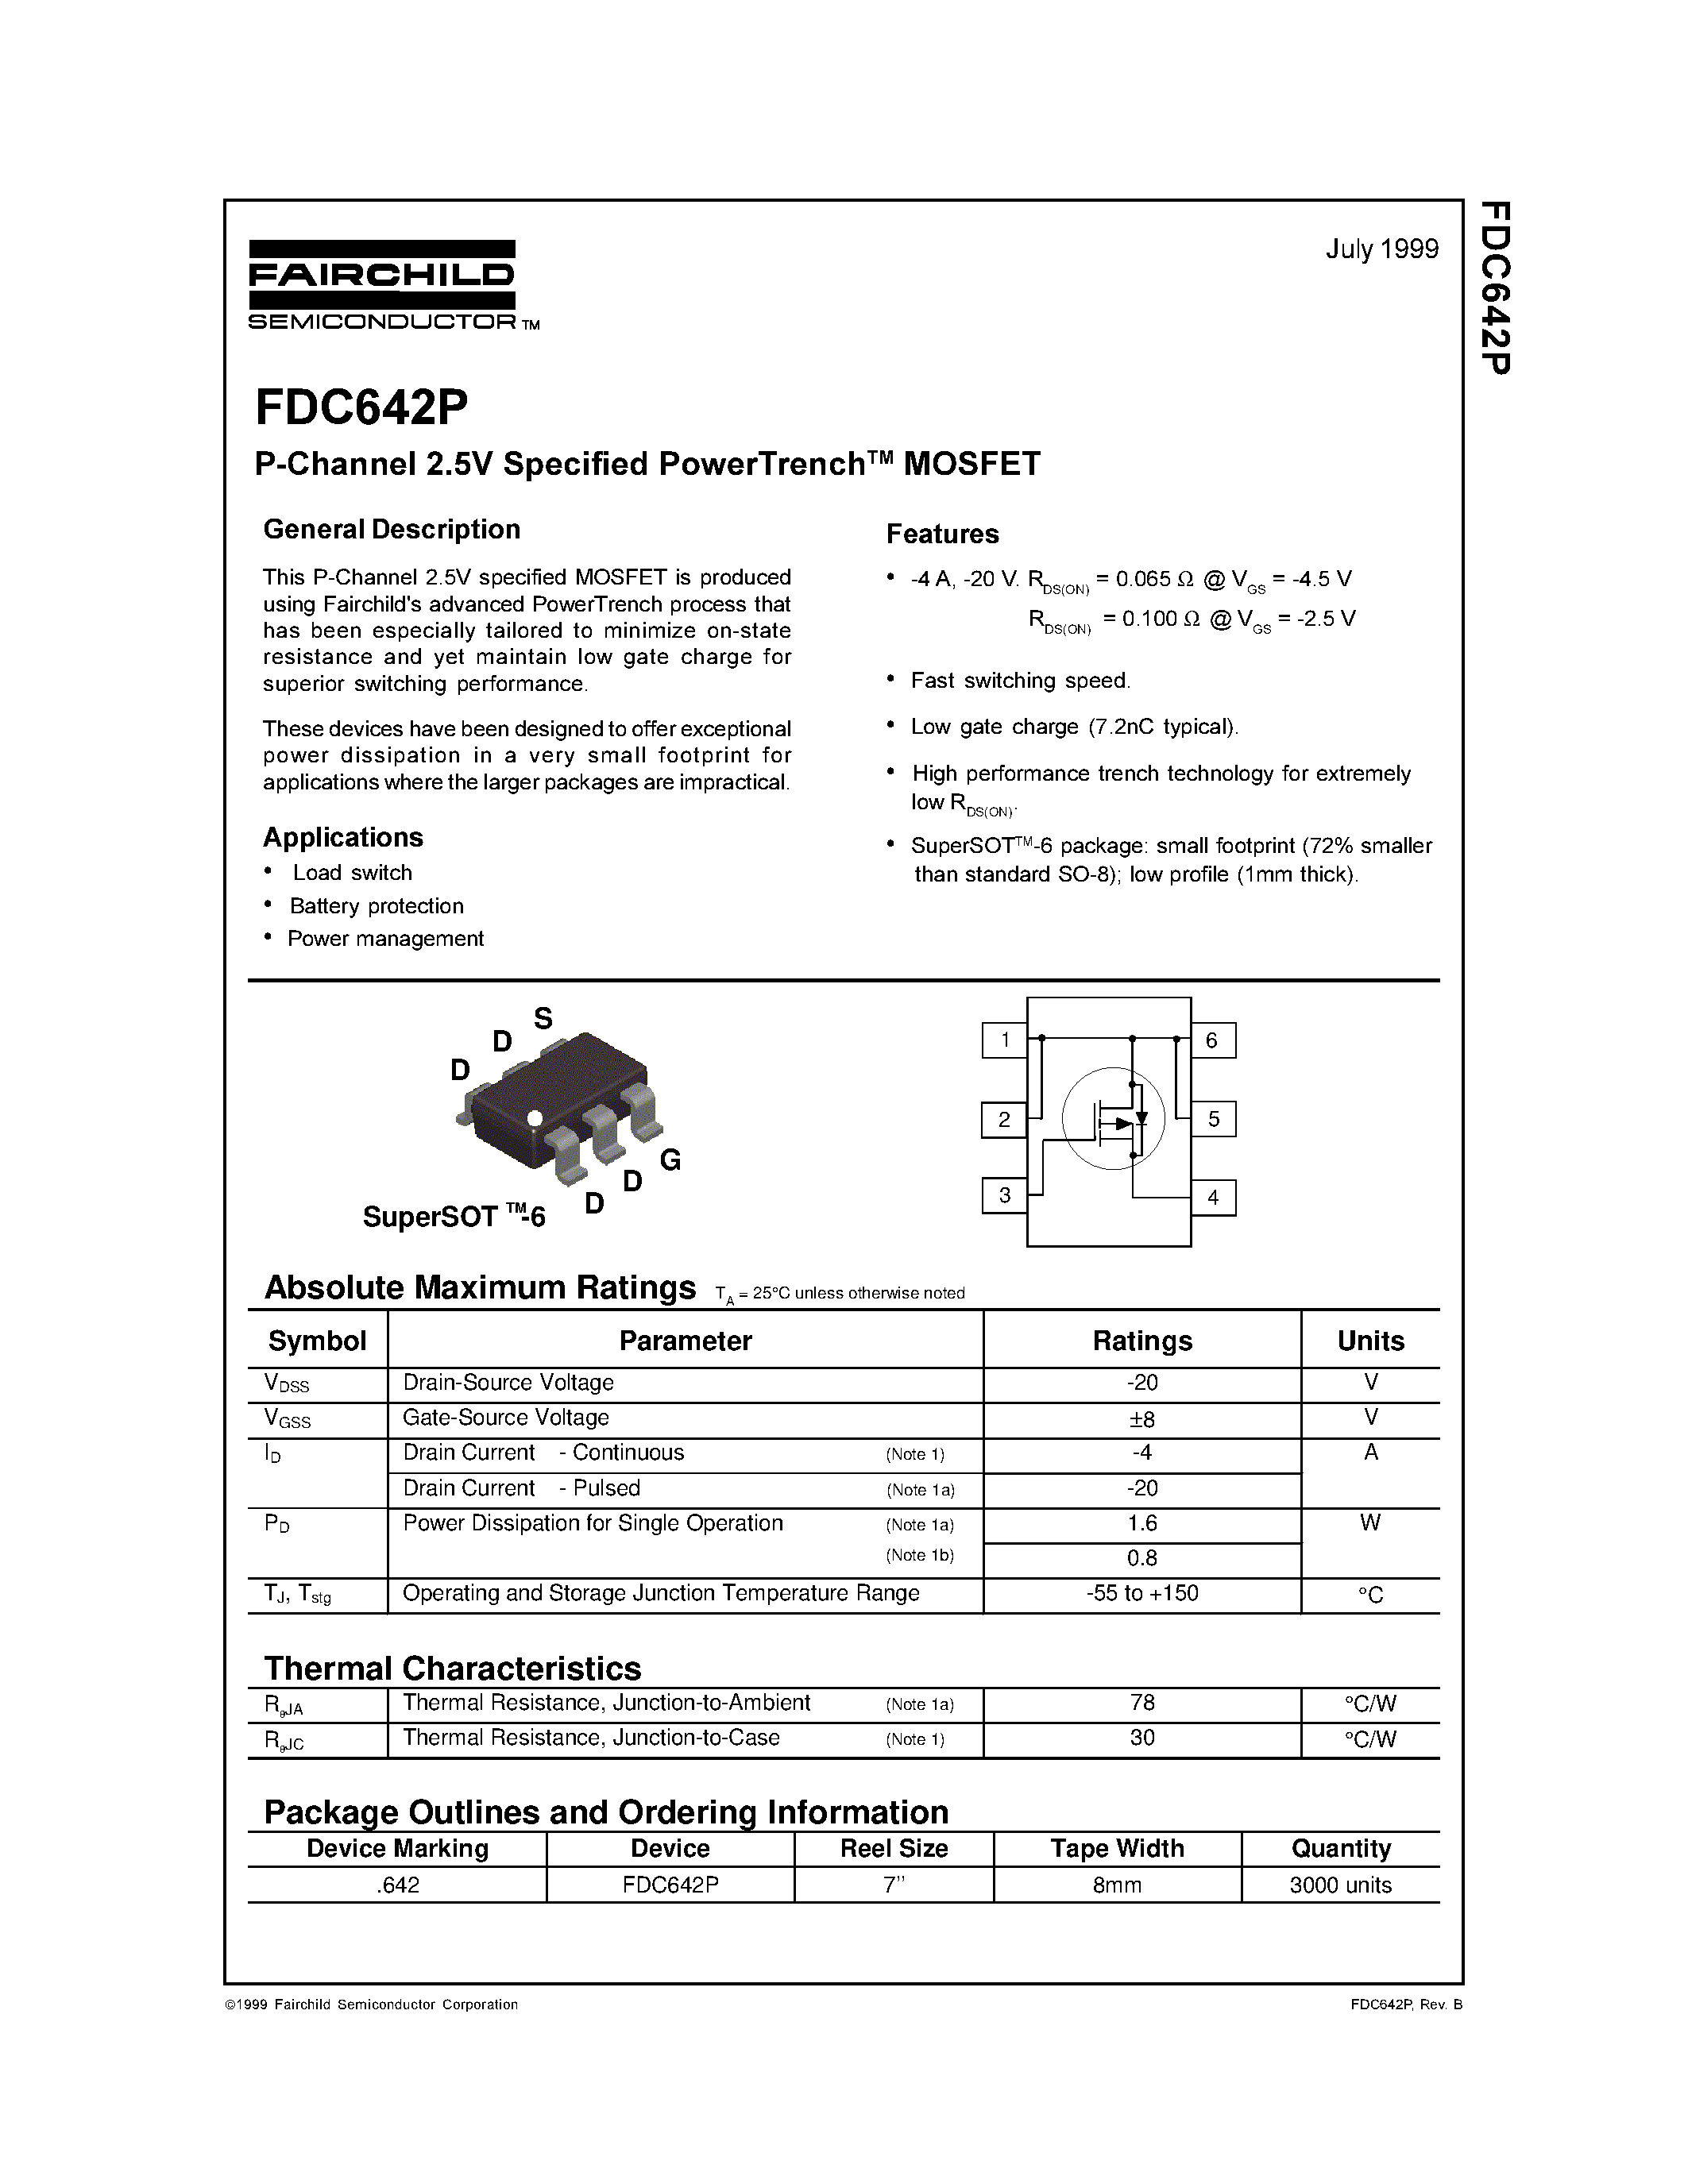 Datasheet FDC642P - P-Channel 2.5V Specified PowerTrenchMOSFET page 1